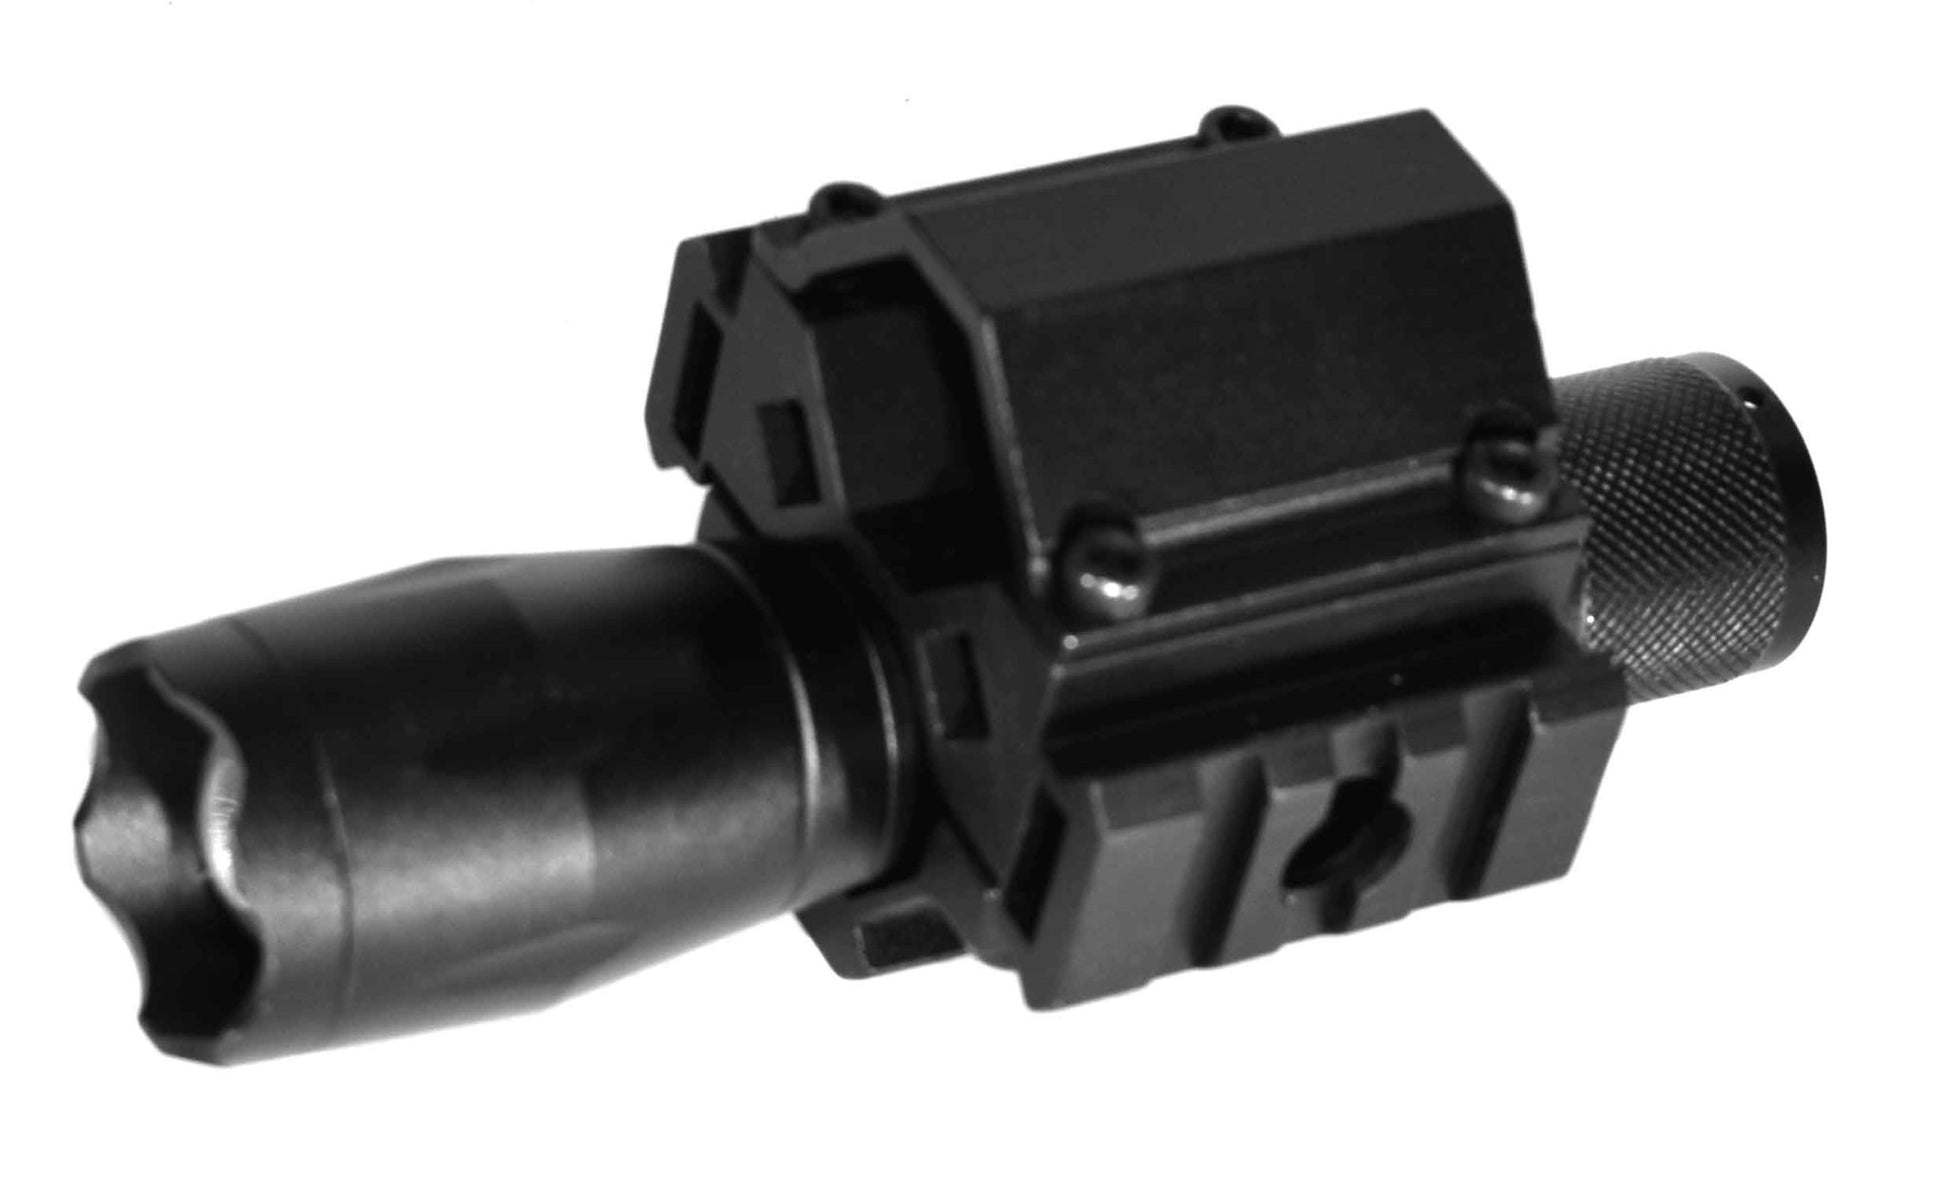 Tactical 1200 Lumen Flashlight With Mount Compatible With 20 Gauge Shotguns. - TRINITY SUPPLY INC